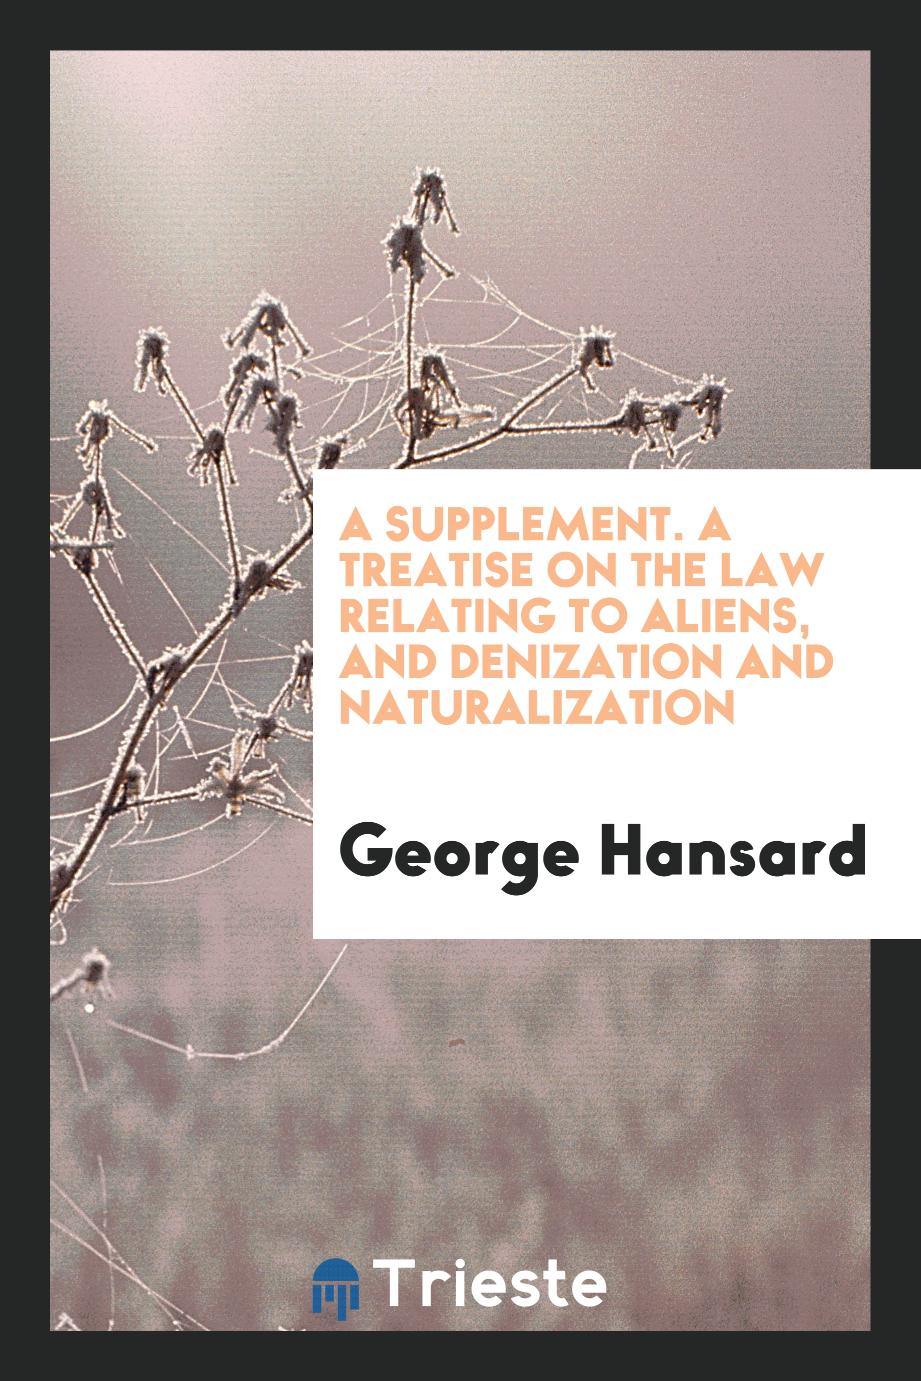 A supplement. A Treatise on the Law Relating to Aliens, and Denization and Naturalization